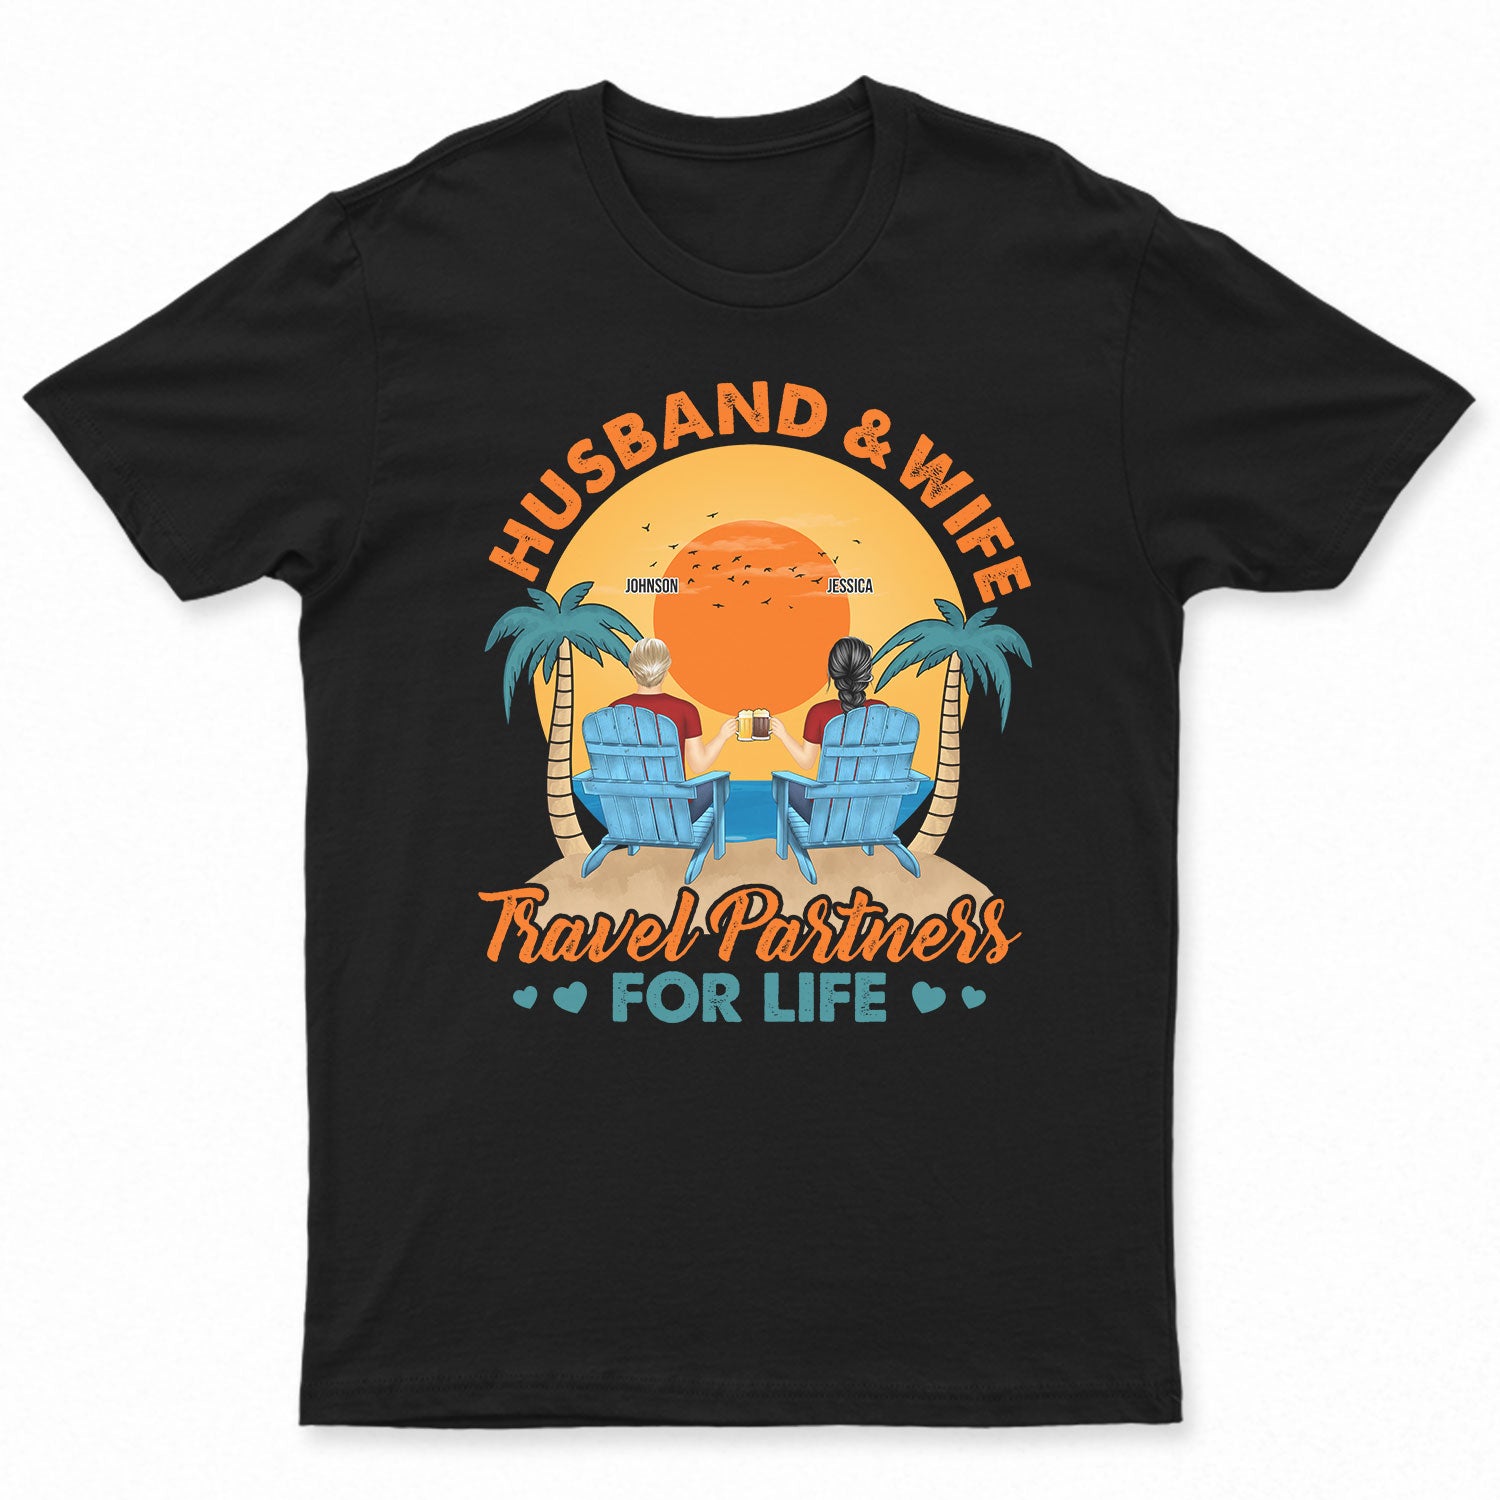 Traveling Partners For Life - Beach Travel Couple Gift - Personalized Custom T Shirt